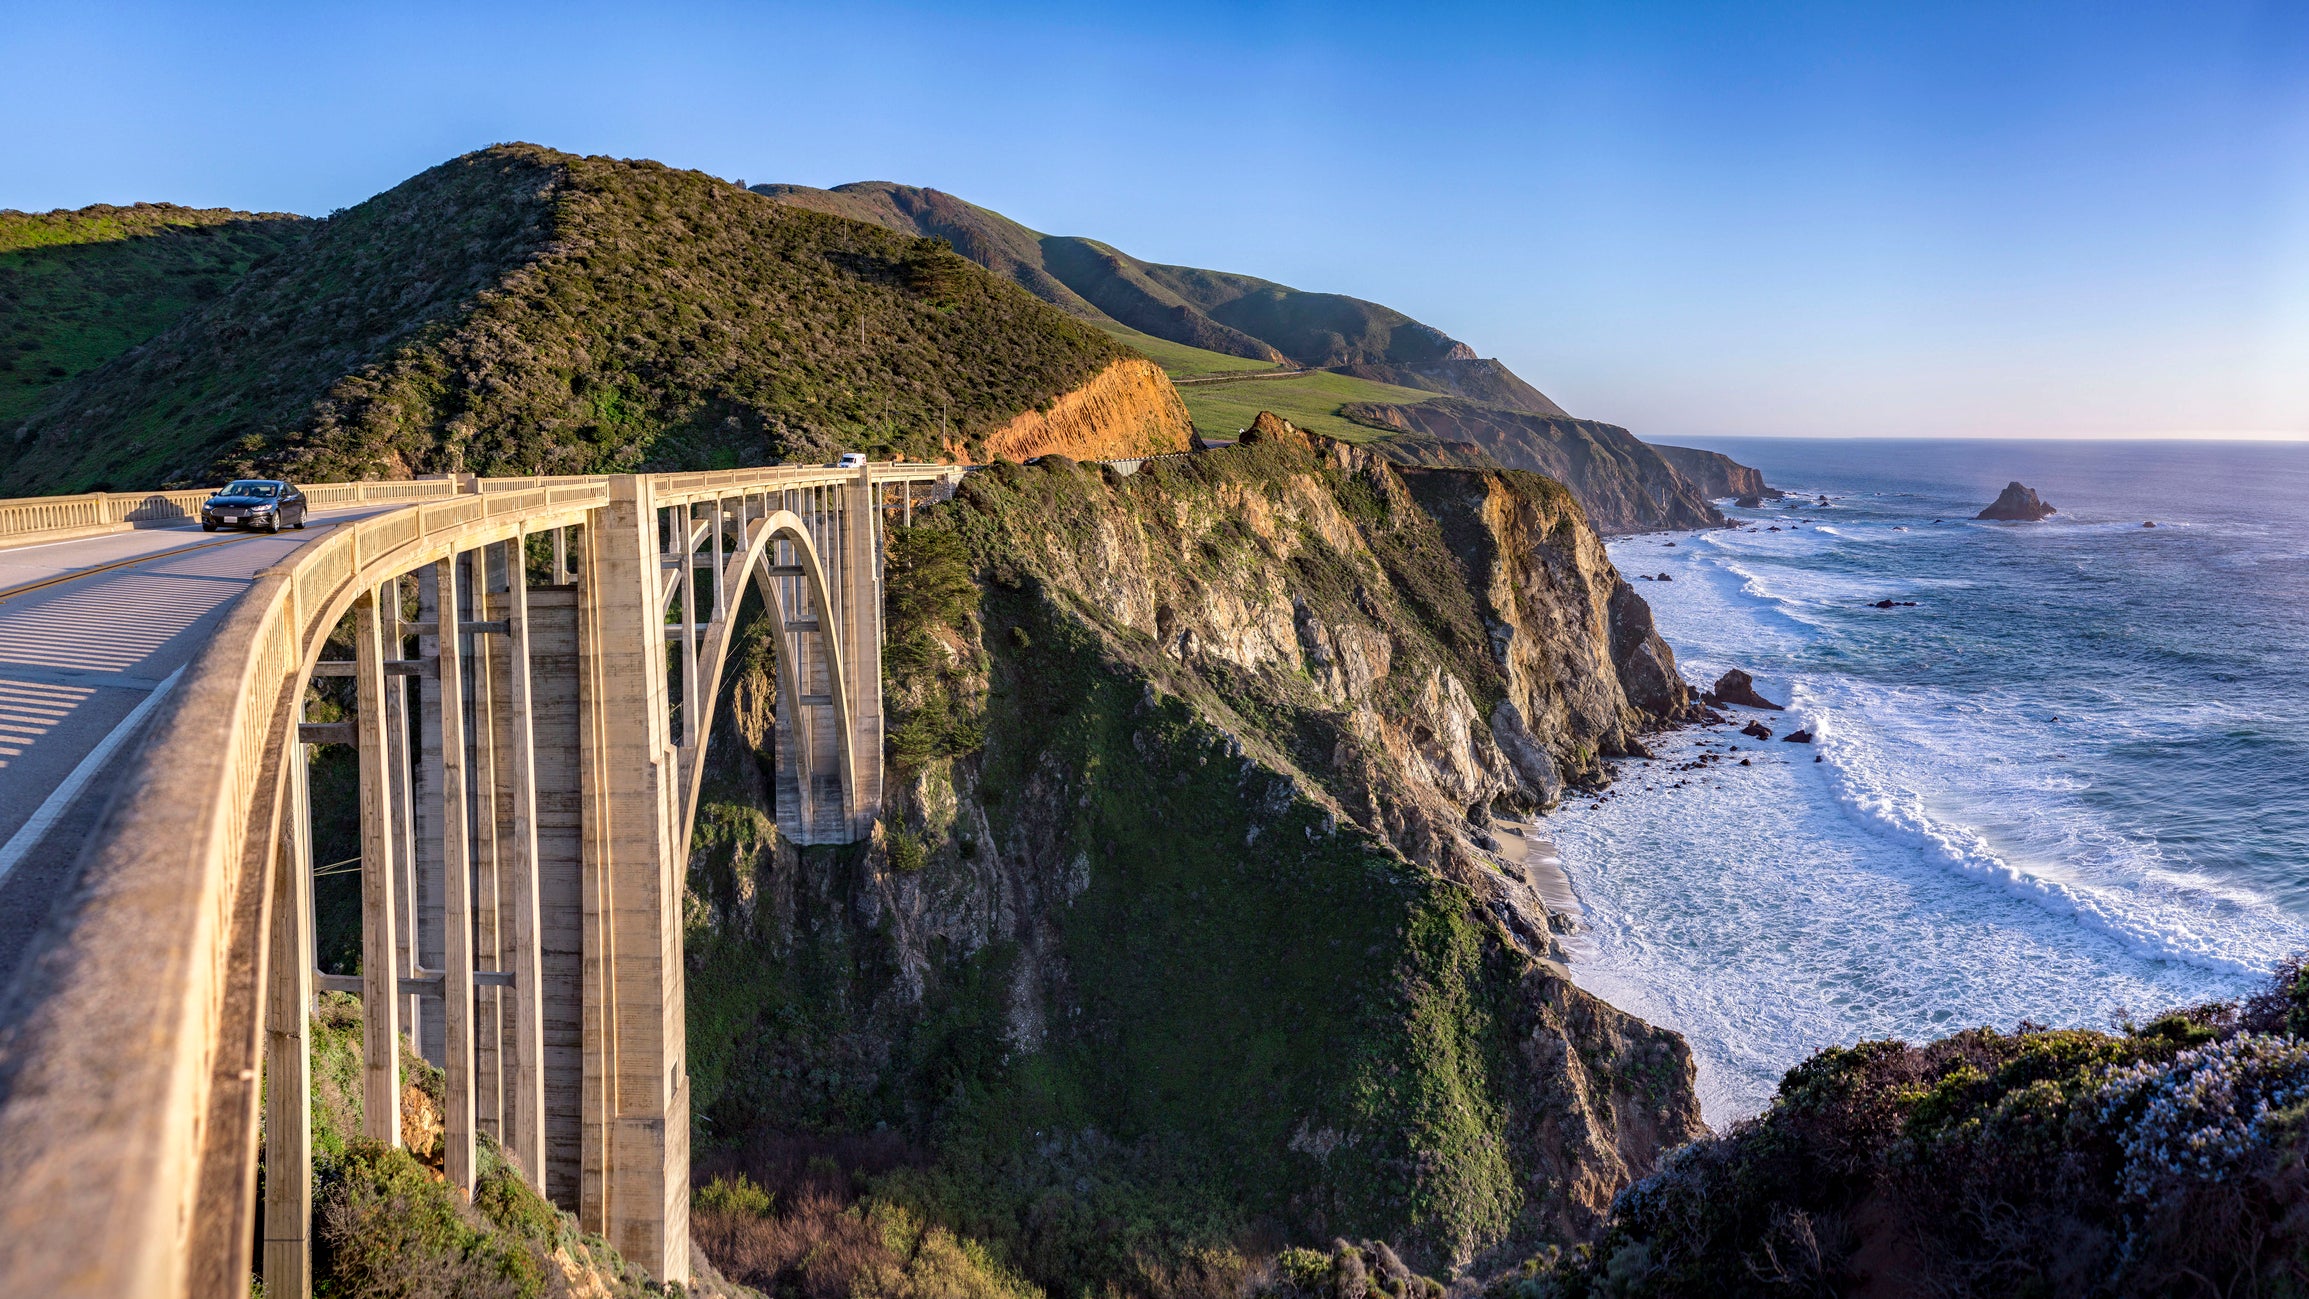 Bixby Creek Bridge is featured heavily in the show